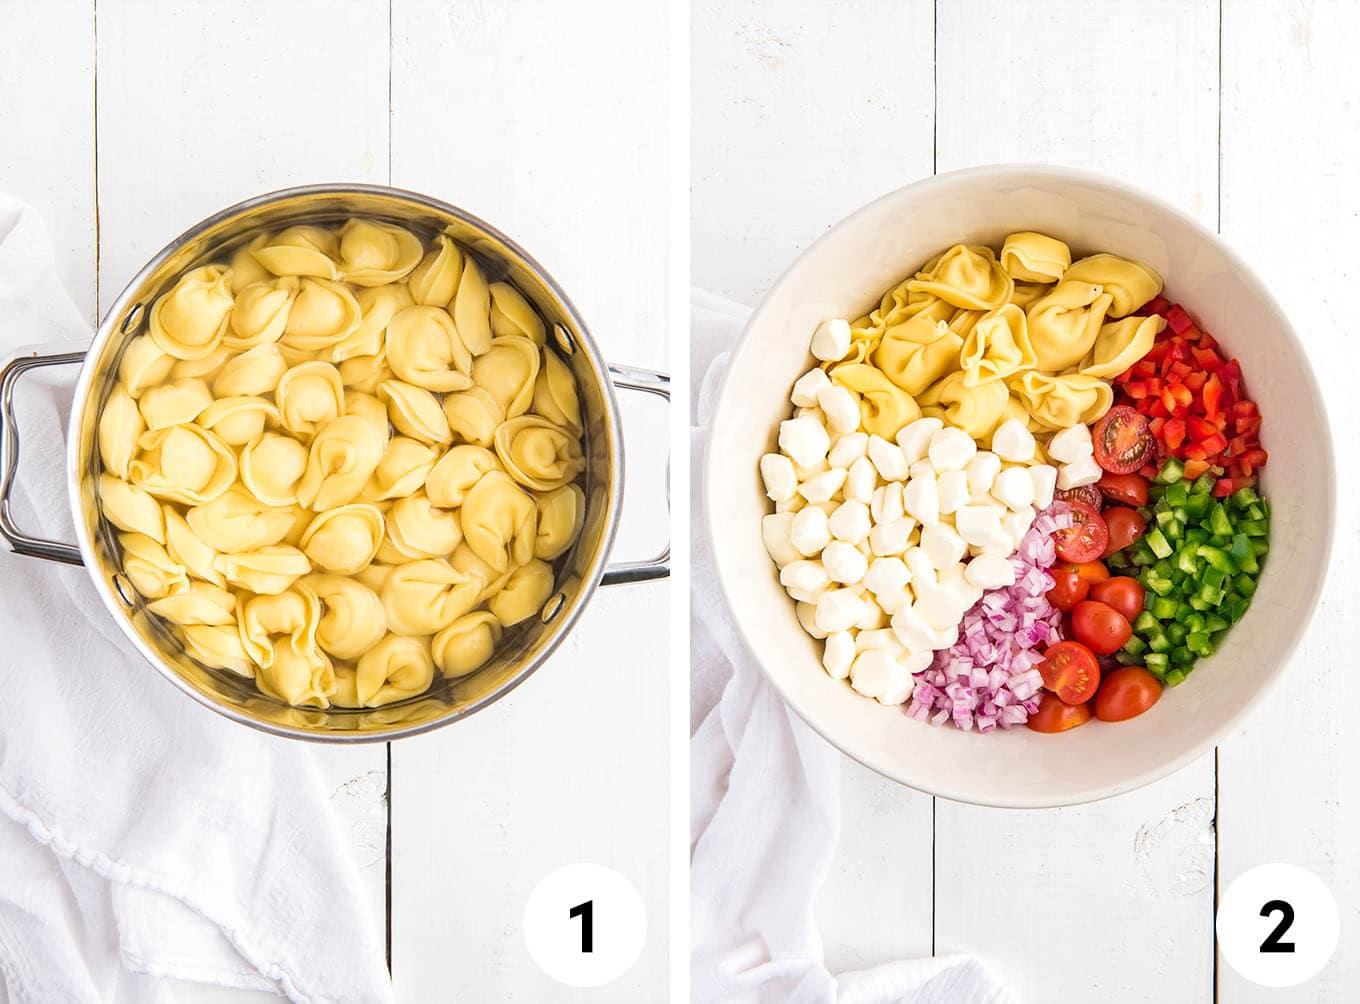 A collage of images showing cooking the tortellini in a pot and the ingredients in a bowl for the salad.